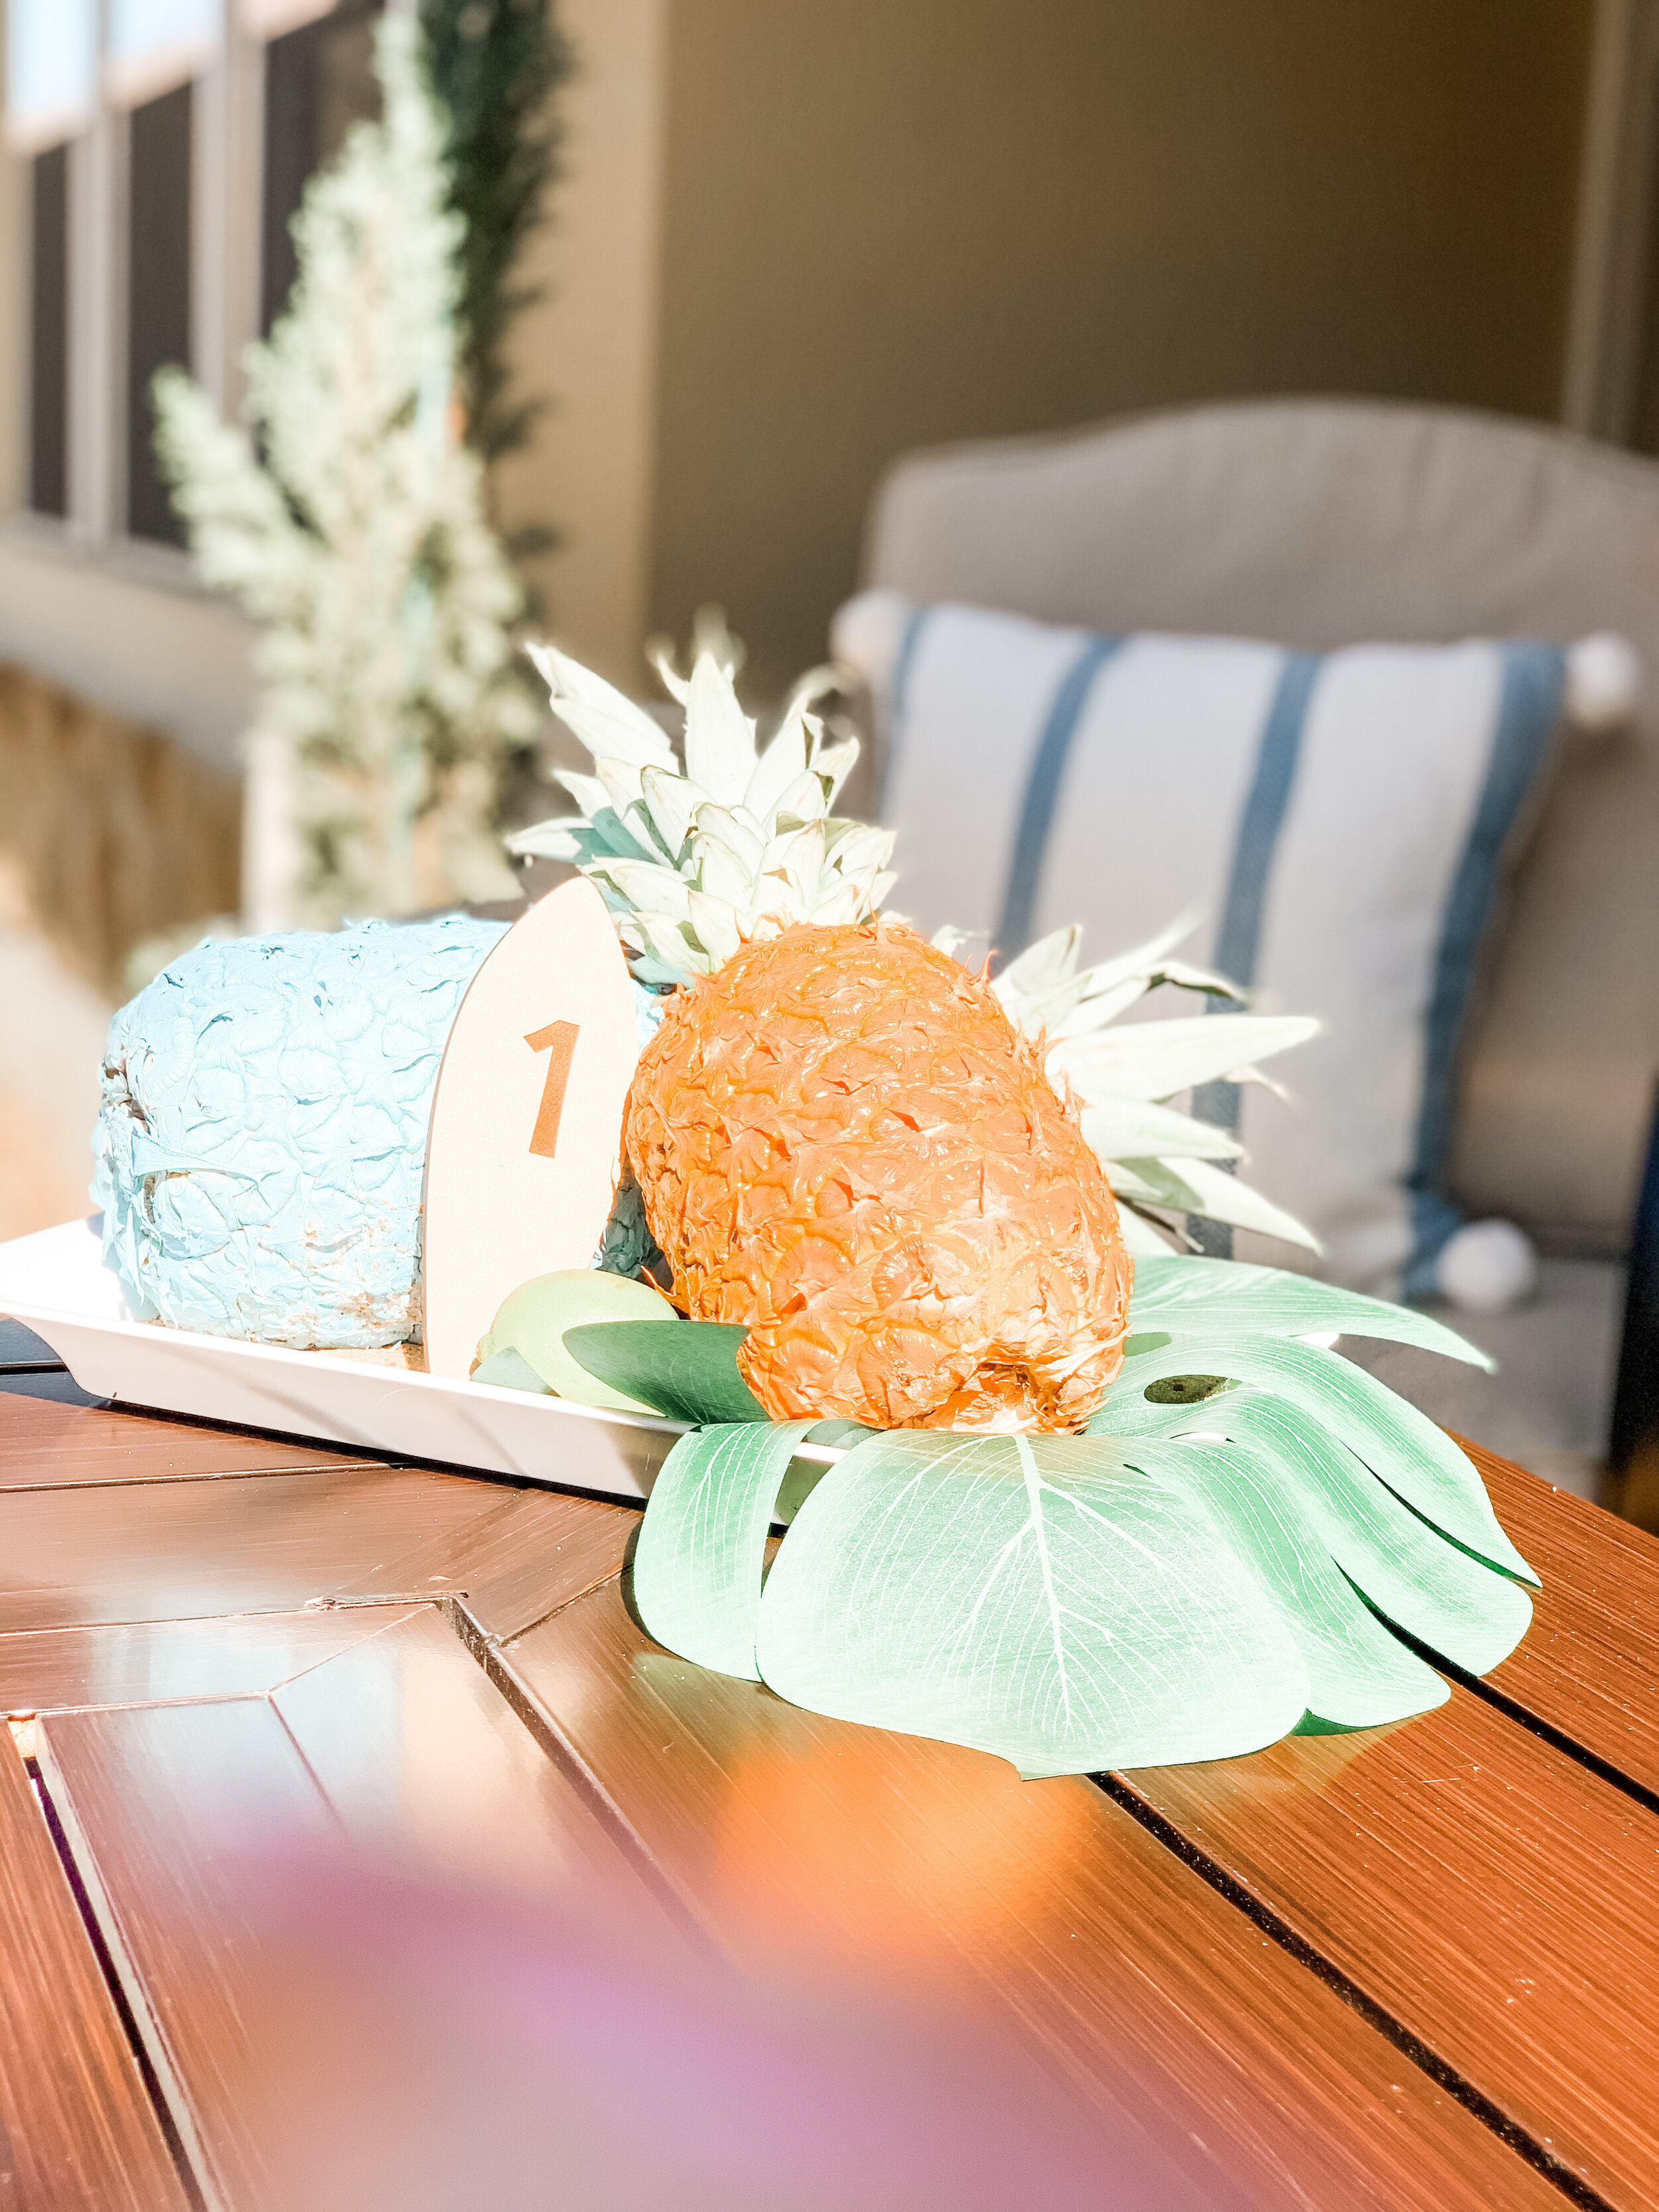 Let your little one catch their first wave this summer with these ideas for a vintage-yet-modern surf-themed first birthday party! Get details now at mintevent design.com!